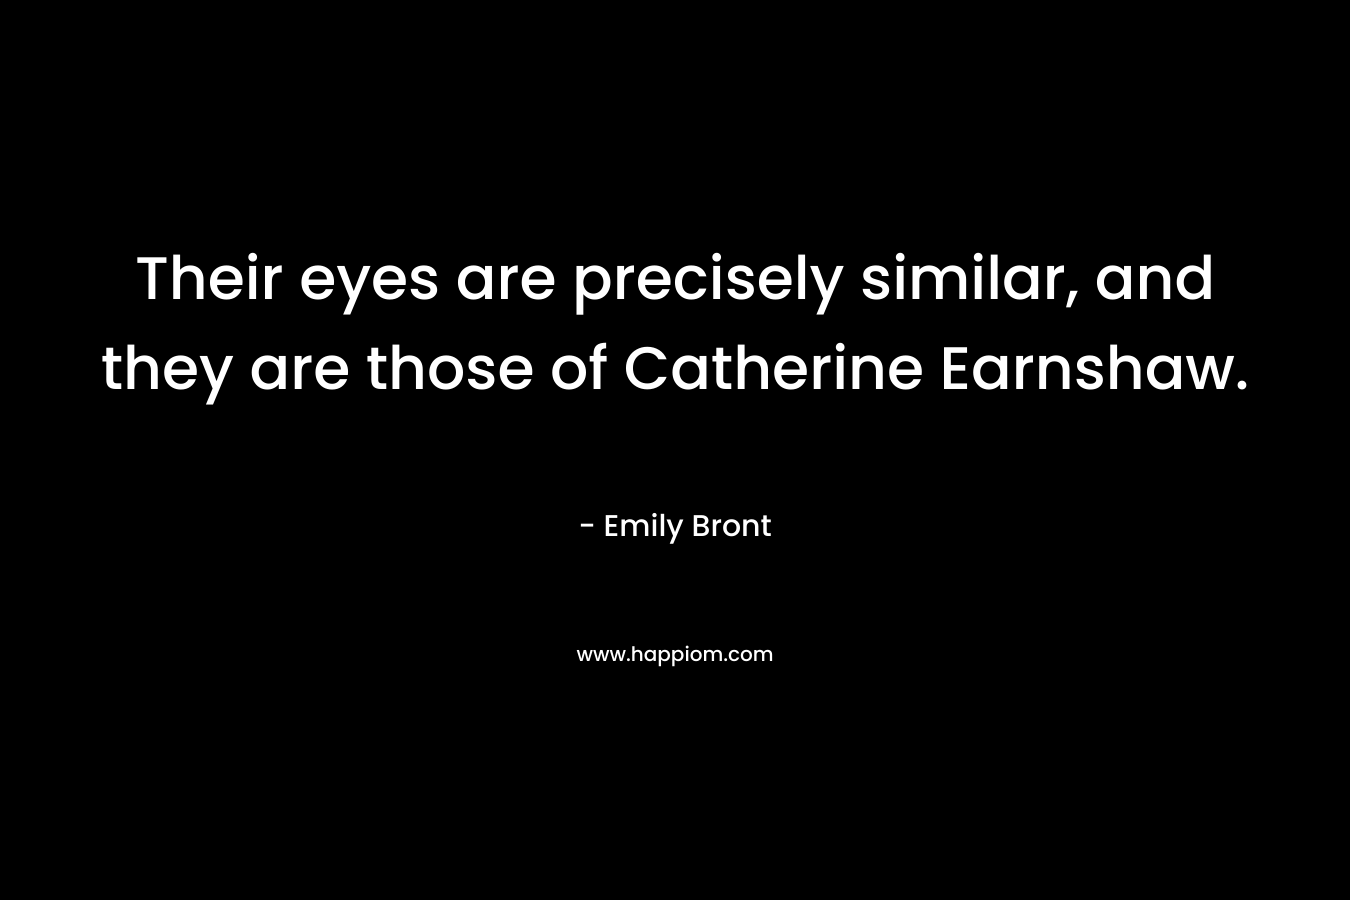 Their eyes are precisely similar, and they are those of Catherine Earnshaw.